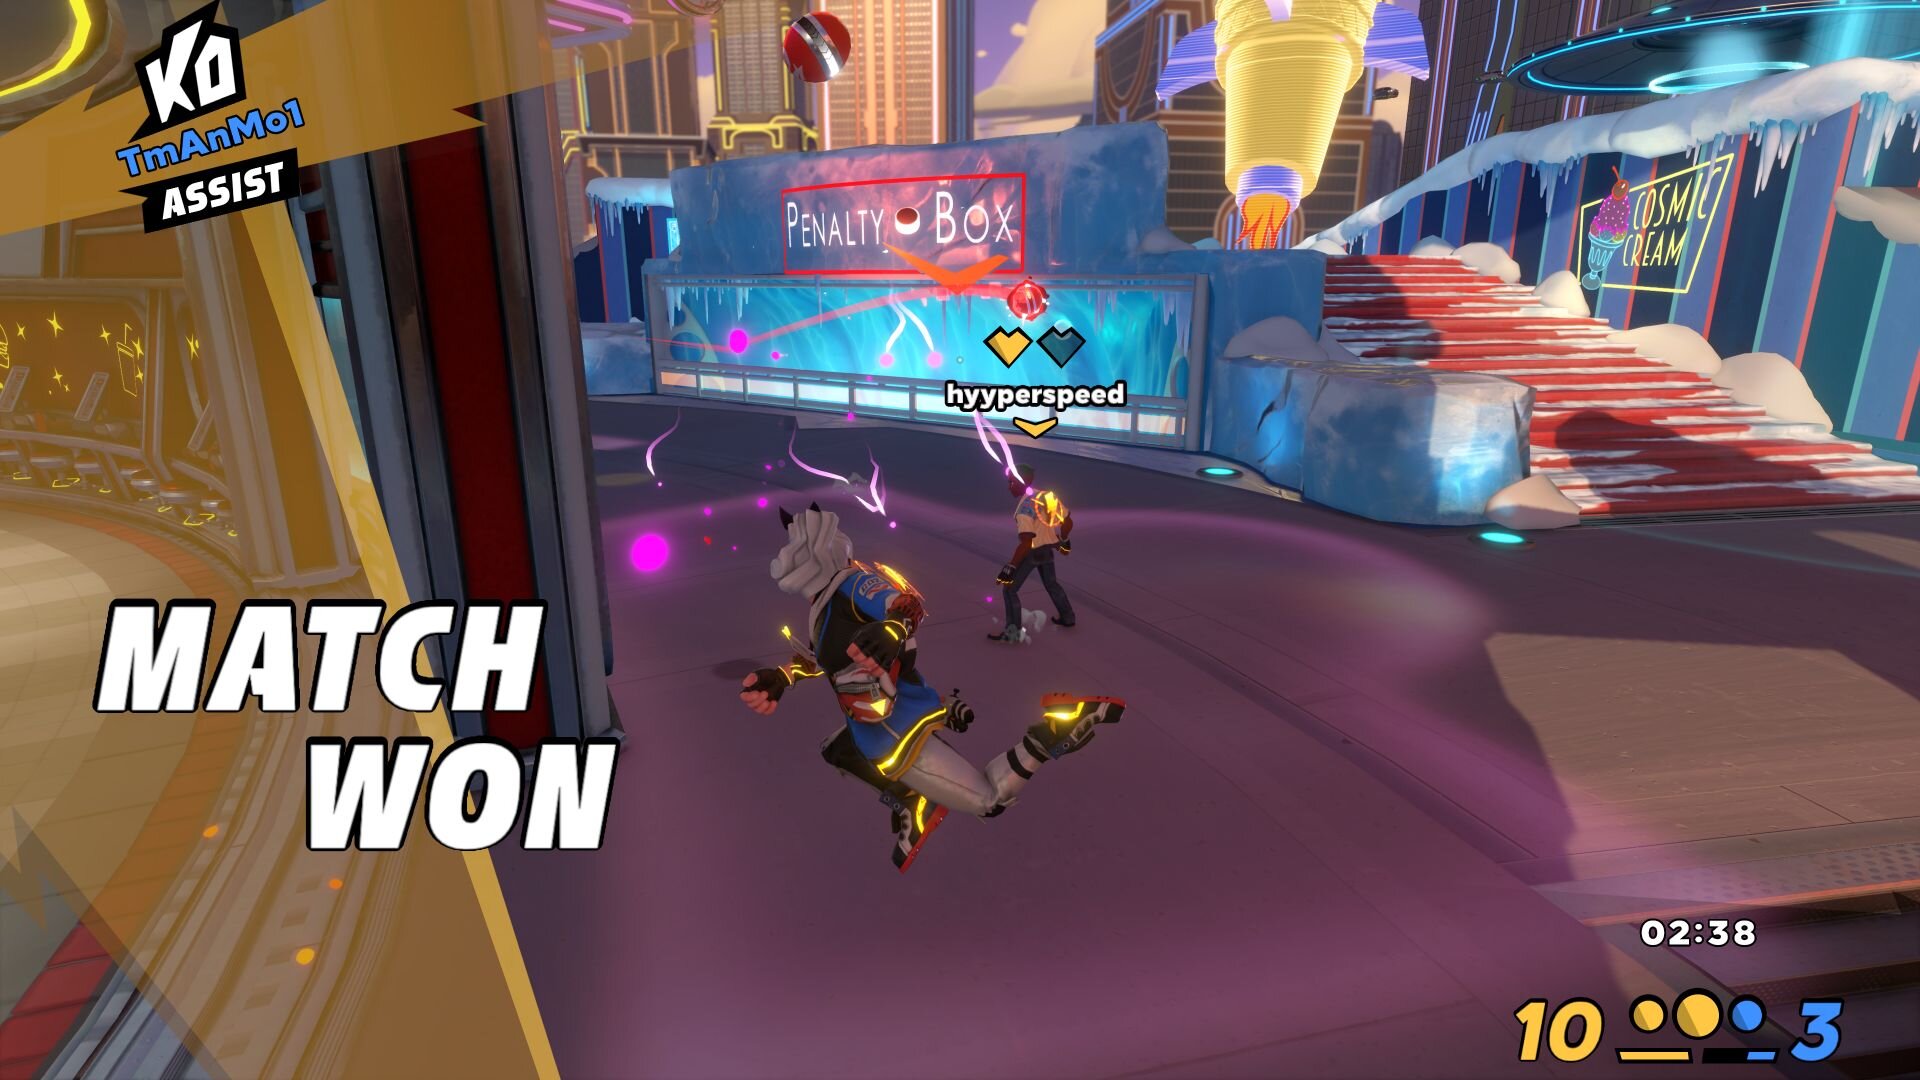 Knockout City's Dodgeball Gameplay & Customization Shown Off In Trailer